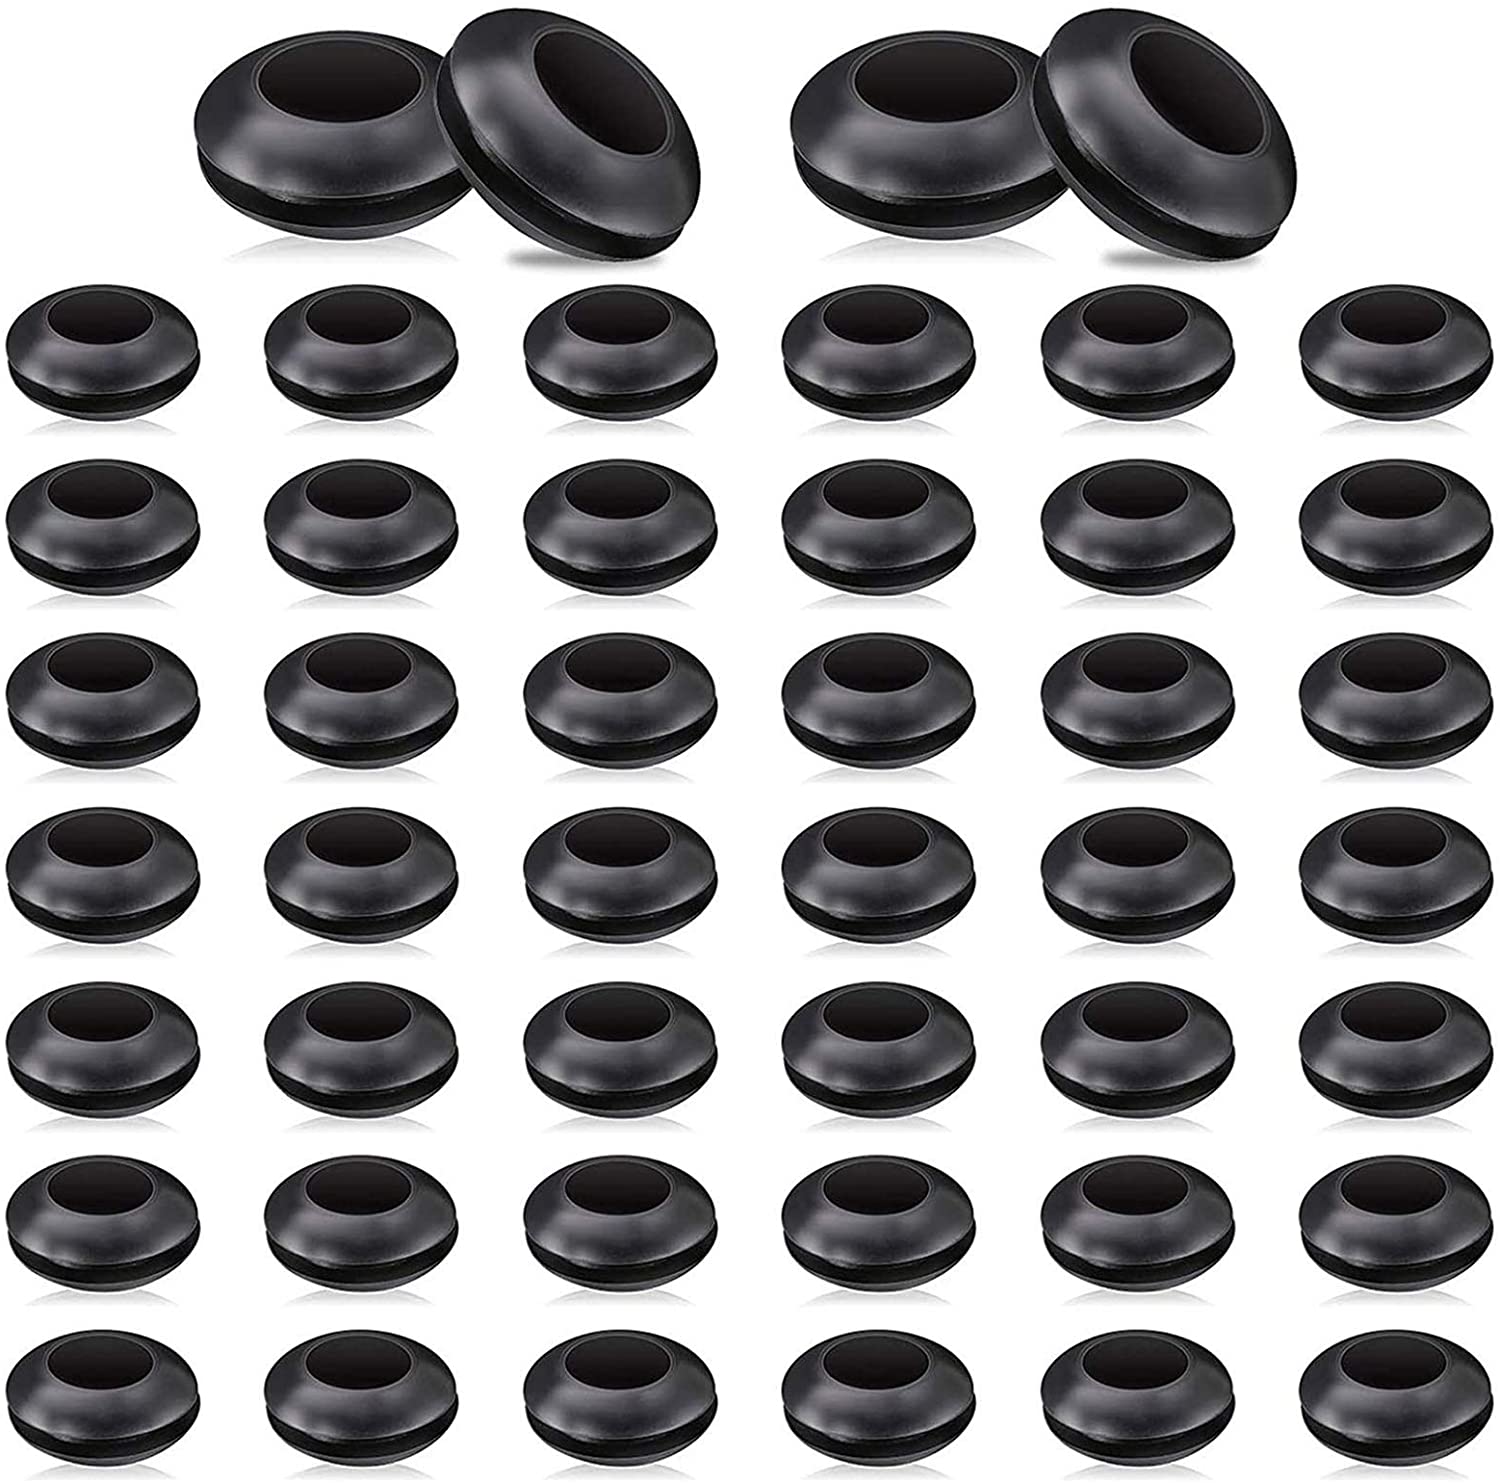 Airlock Grommet, Fermenter Lid Grommet Silicone Grommets for Homebrewing, Straws, Airlock, Beer, Mead, Wine, Silicone Bucket Fermenter Lids, 5/8 Inch OD and 3/8 Inch ID (100)